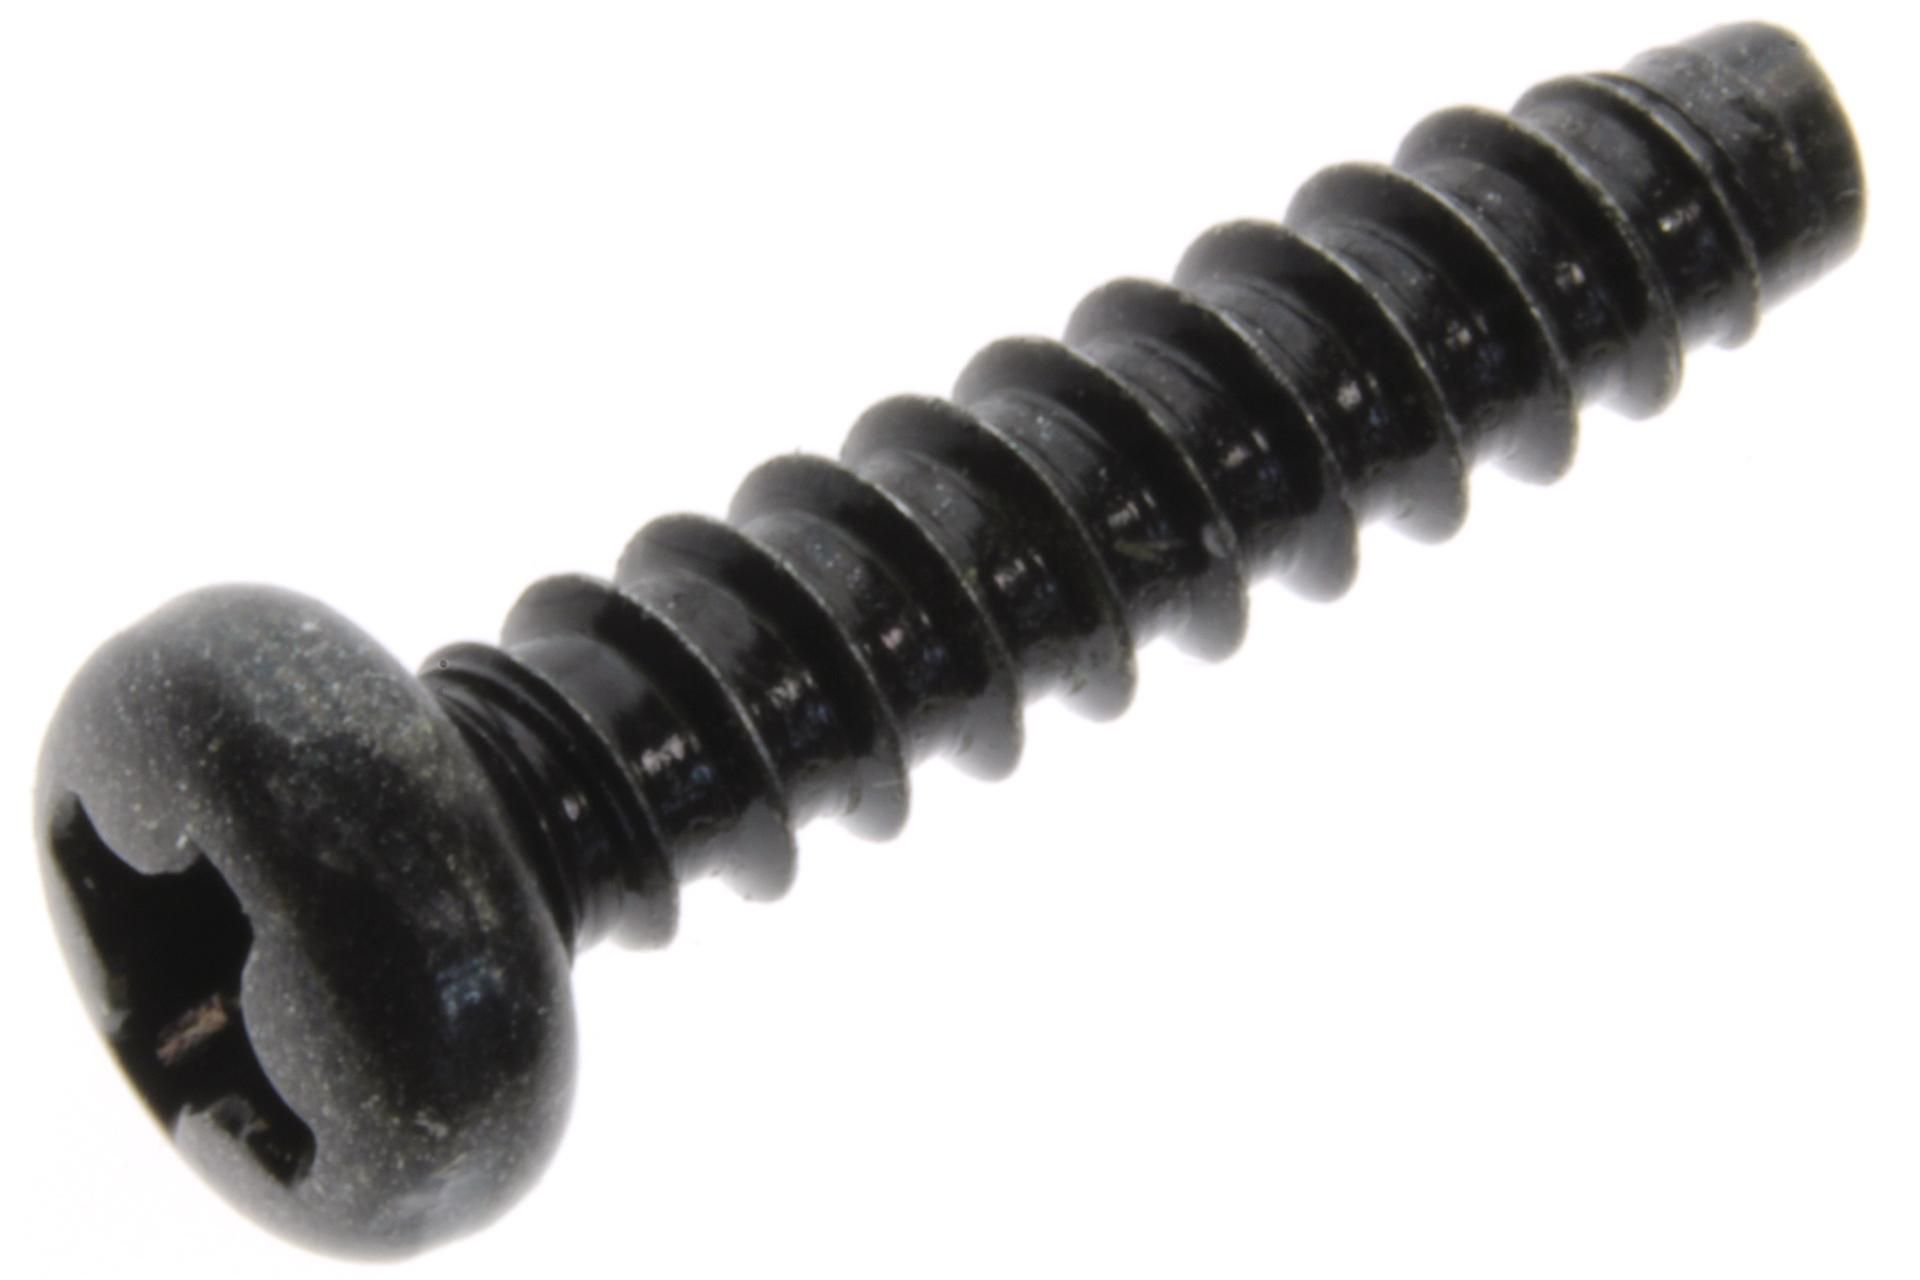 97707-30514-00 SCREW, TAPPING